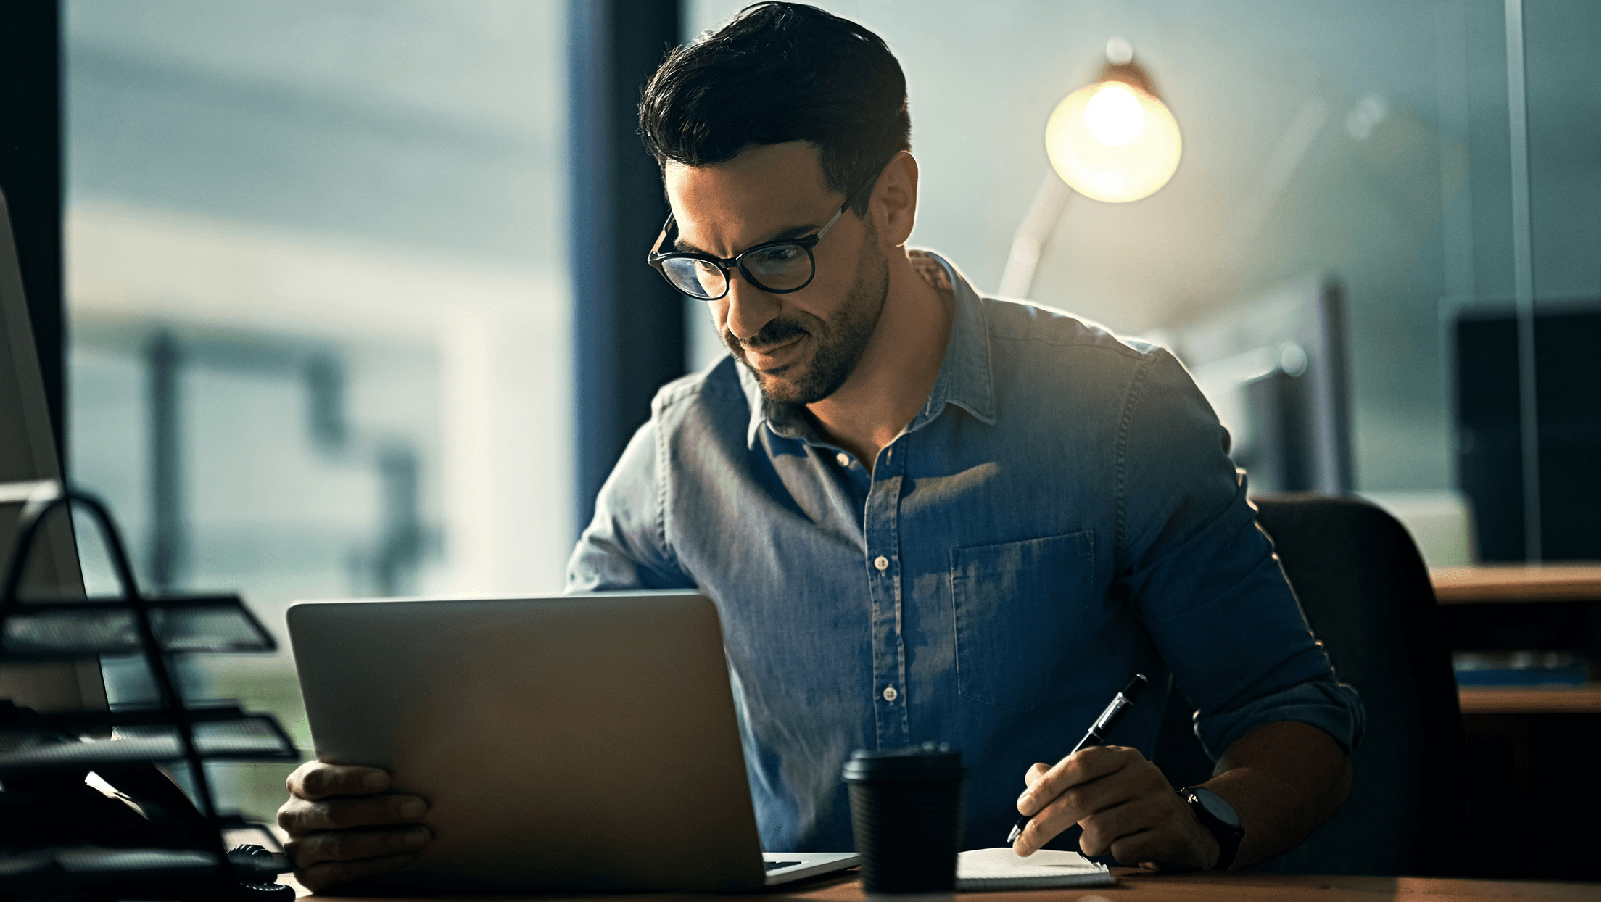 Man wearing glasses and working on a laptop at his desk.